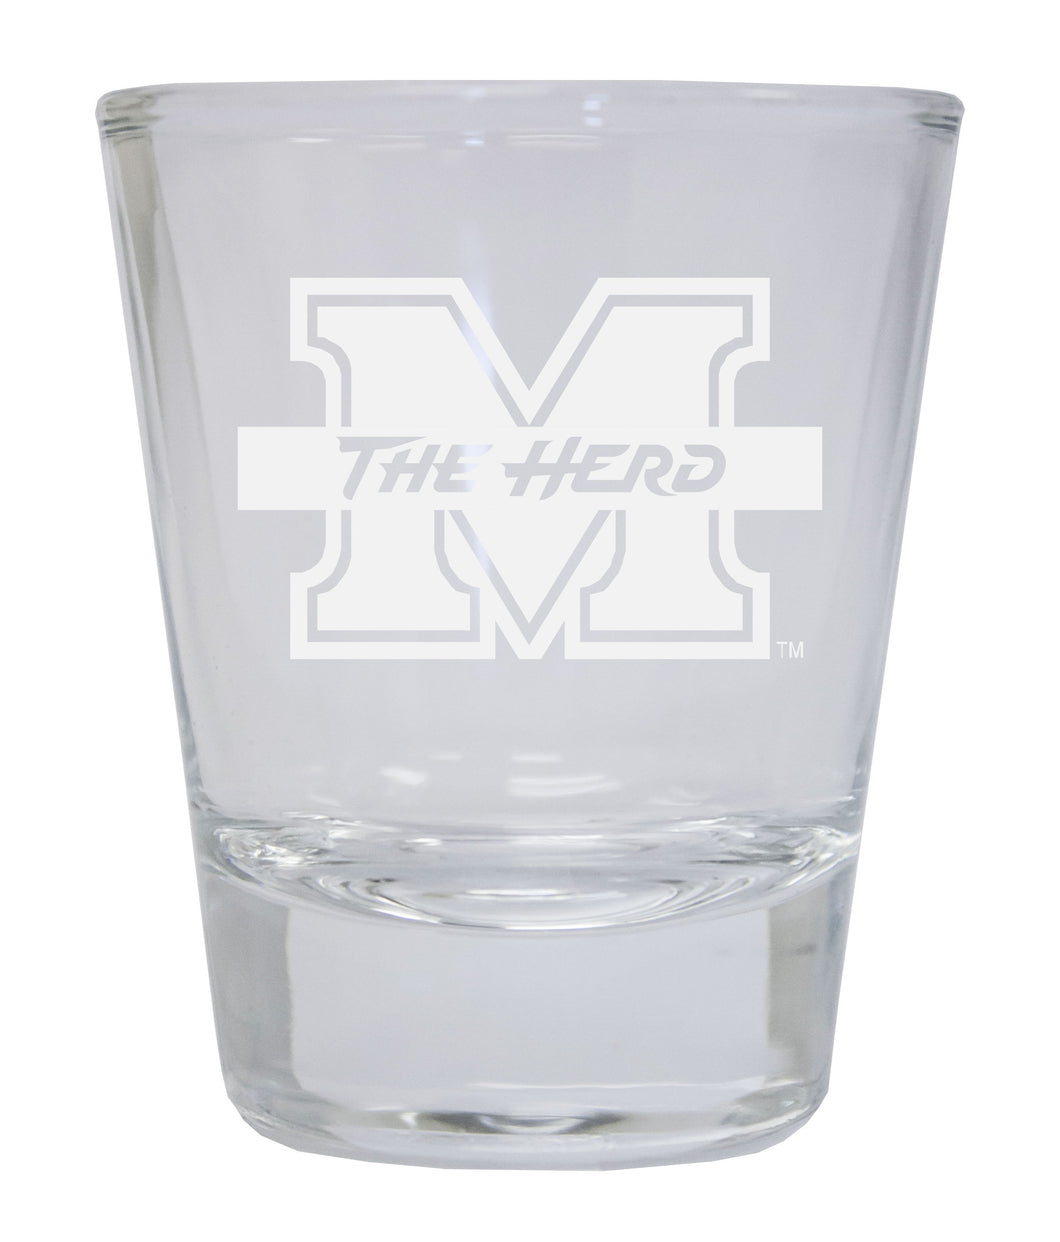 Marshall Thundering Herd Etched Round Shot Glass Officially Licensed Collegiate Product